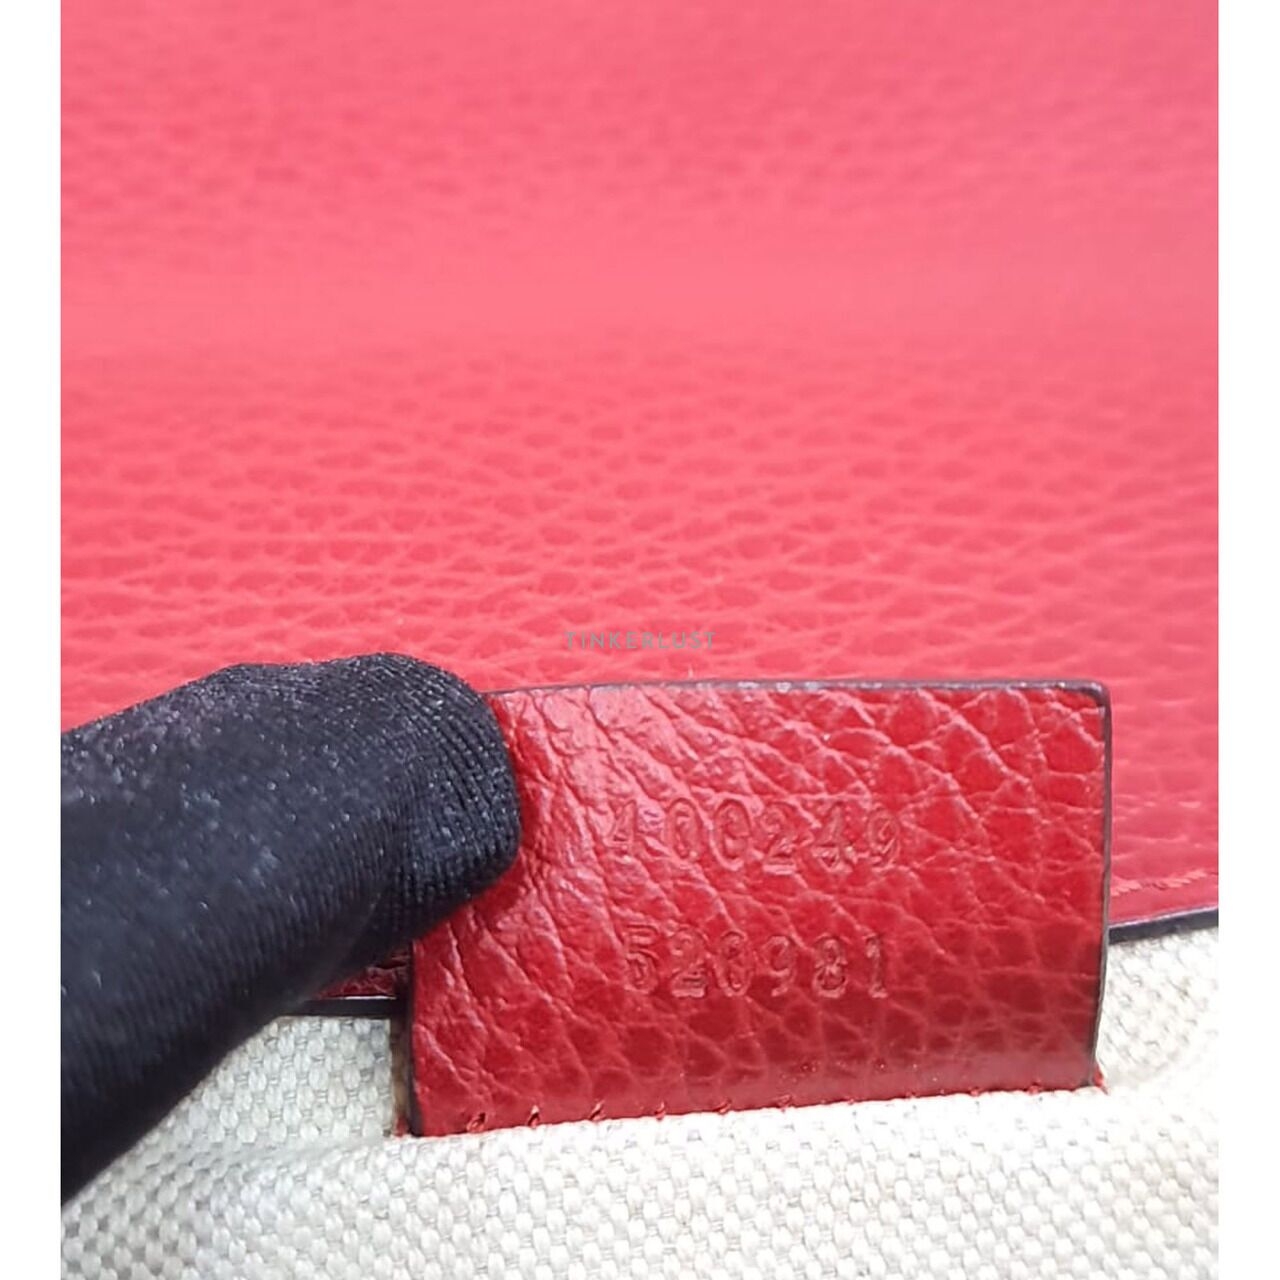 Gucci Dionysus Red Leather Sling Bag